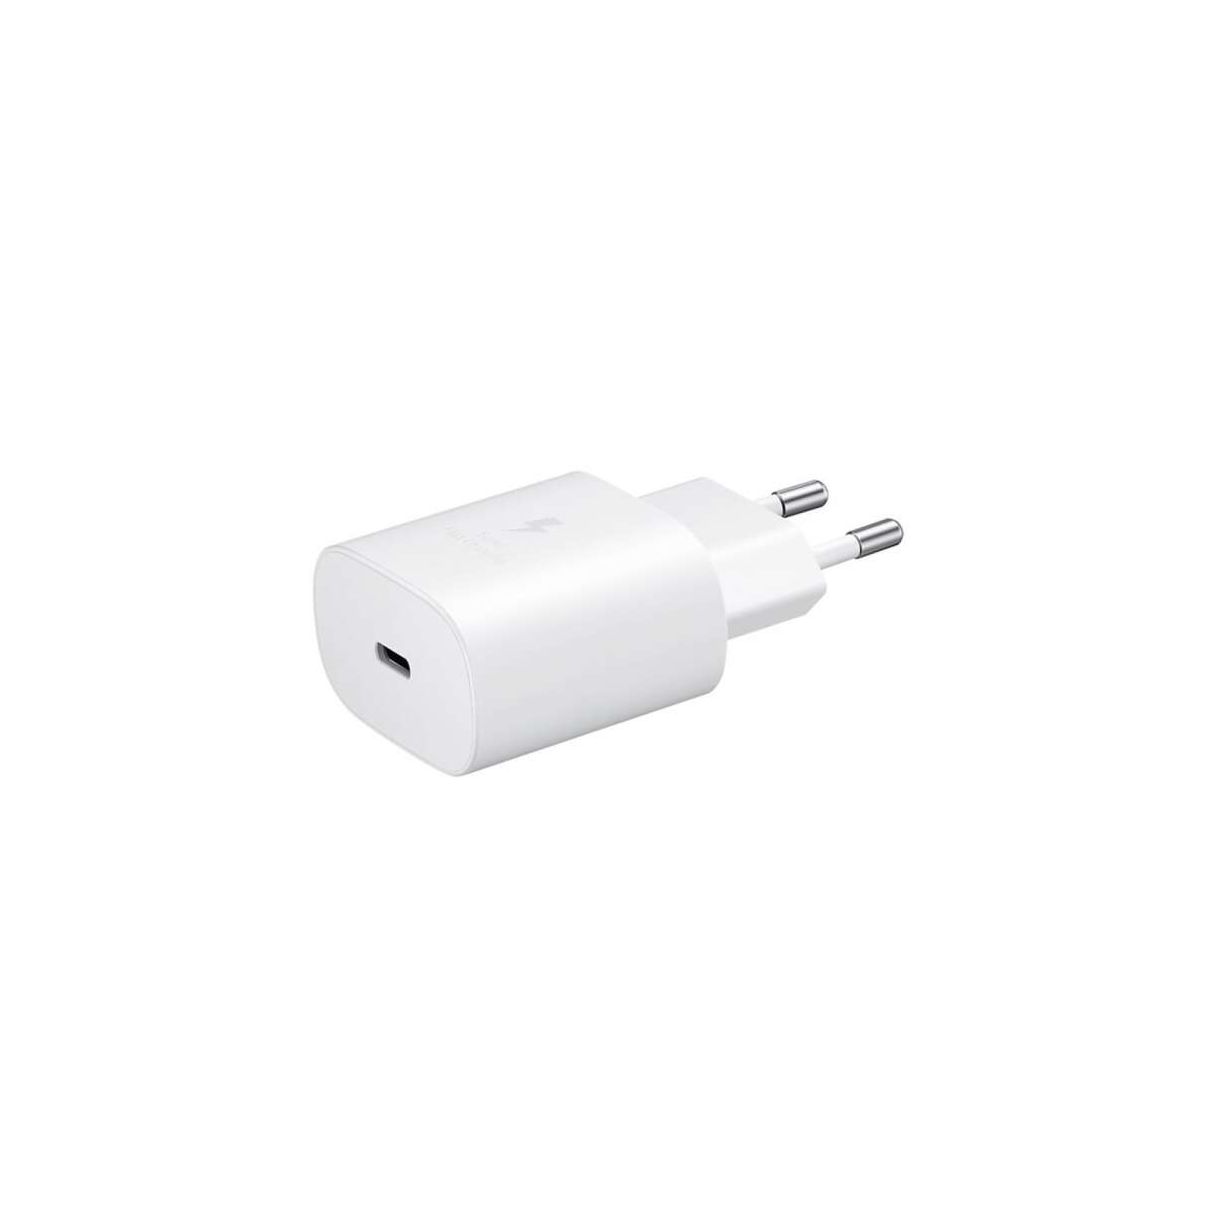 CHARGER SAMSUNG 1 PORT TYPE C 25W COPY FOR SMART  راسيه شاحن  مخرج تايب سي, Smartphones & Tab Chargers